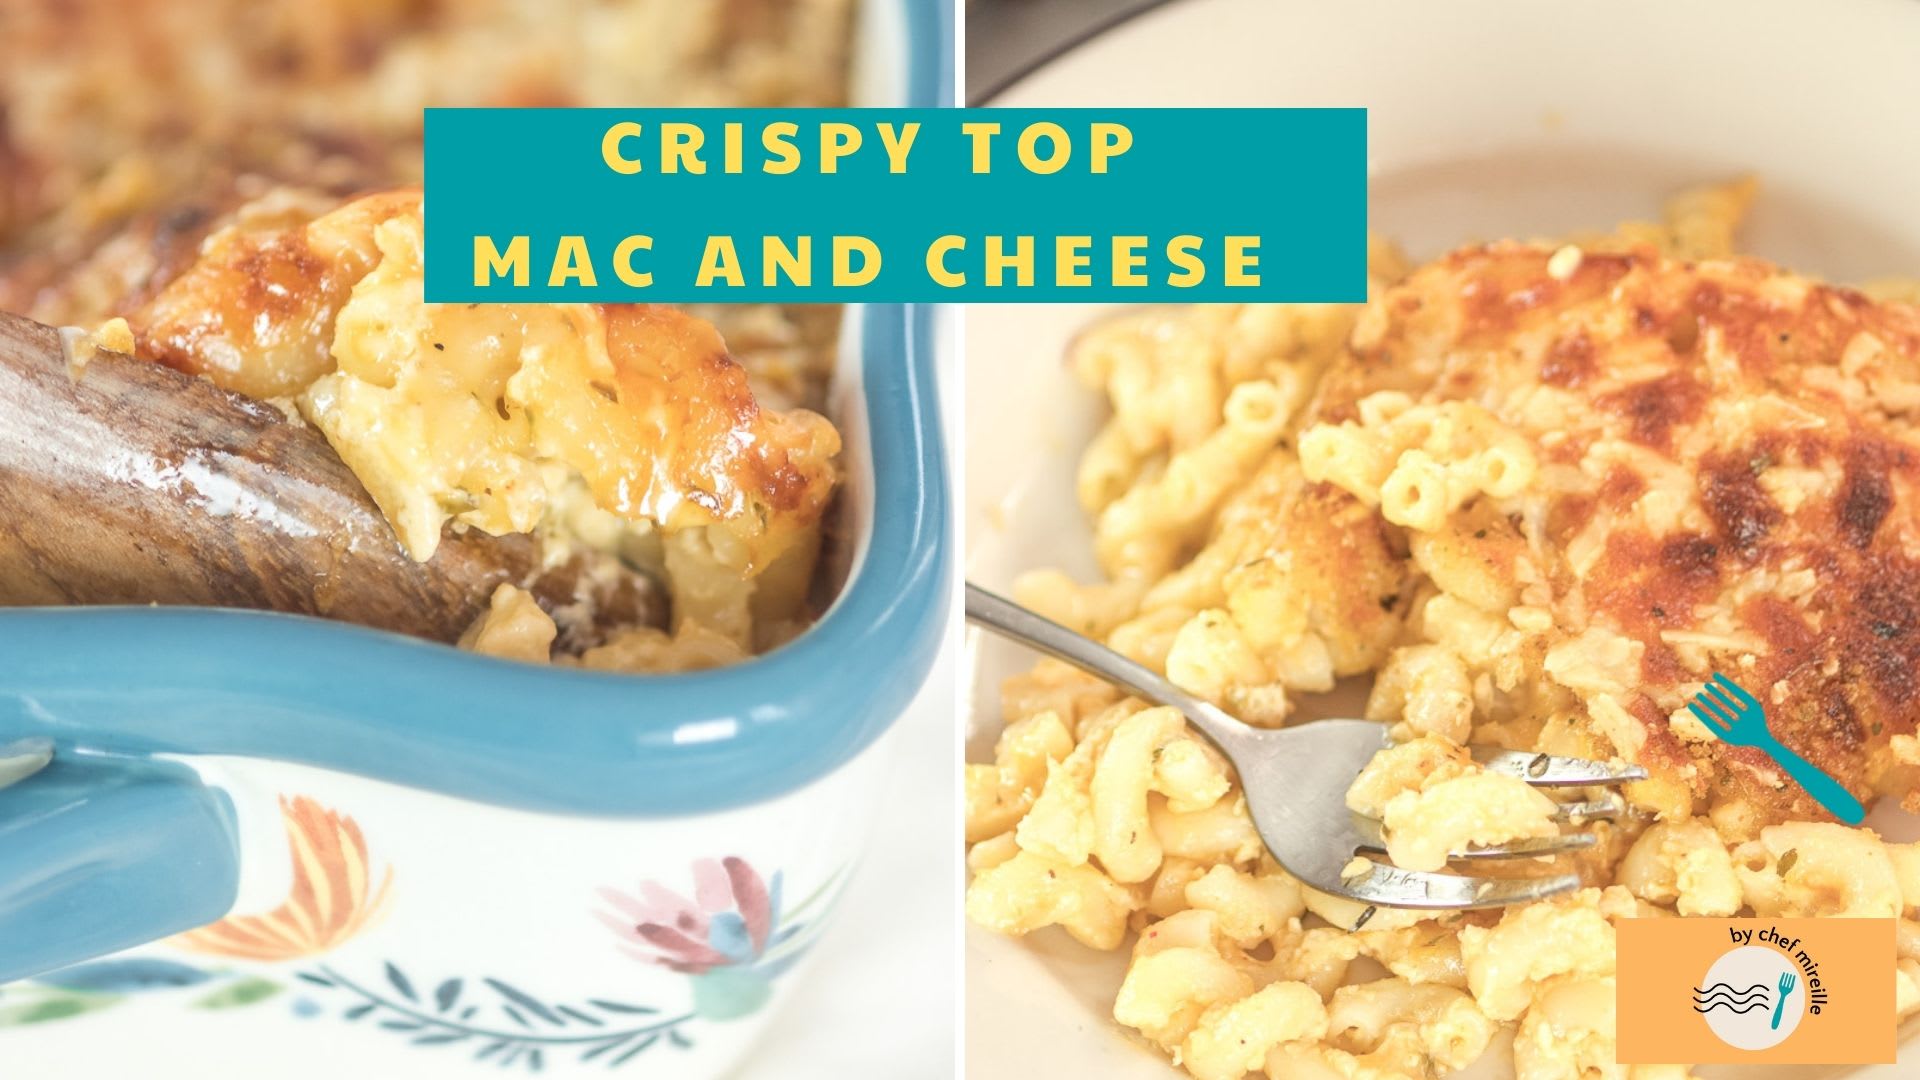 Adult Mac and Cheese with Heavy Cream - Joyous Apron